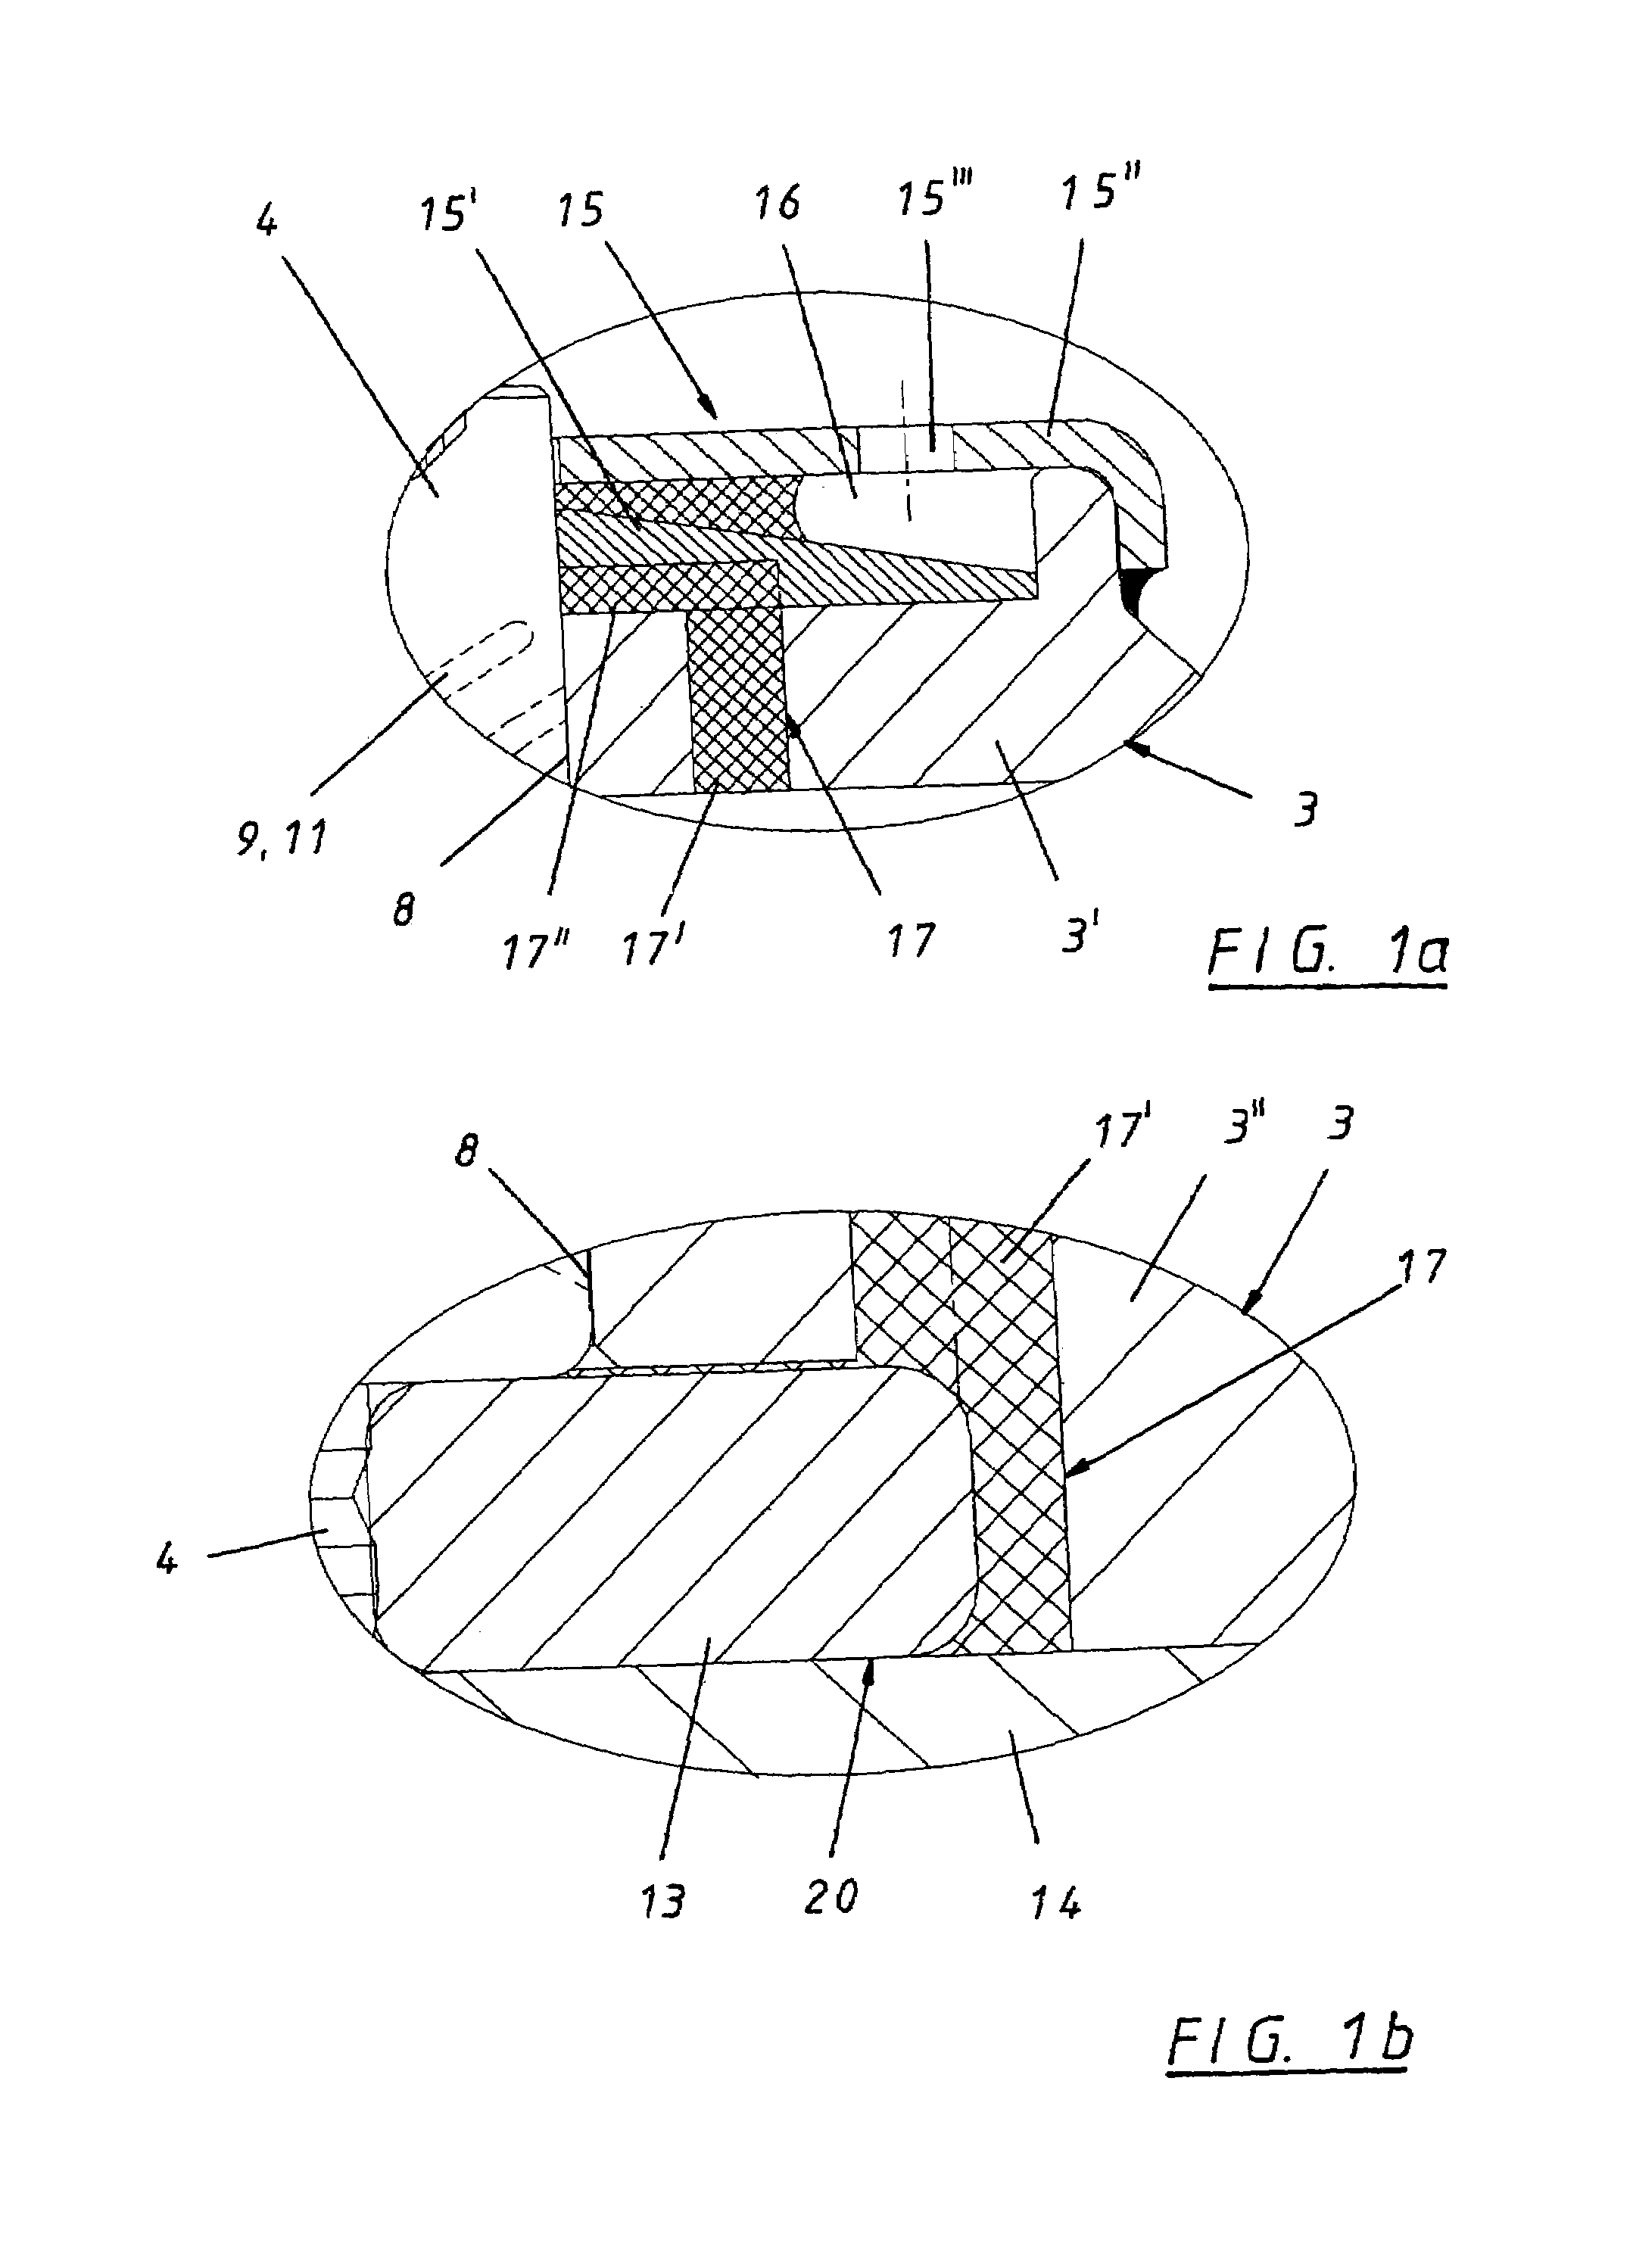 Hydrodynamic bearing, spindle motor and hard disk drive